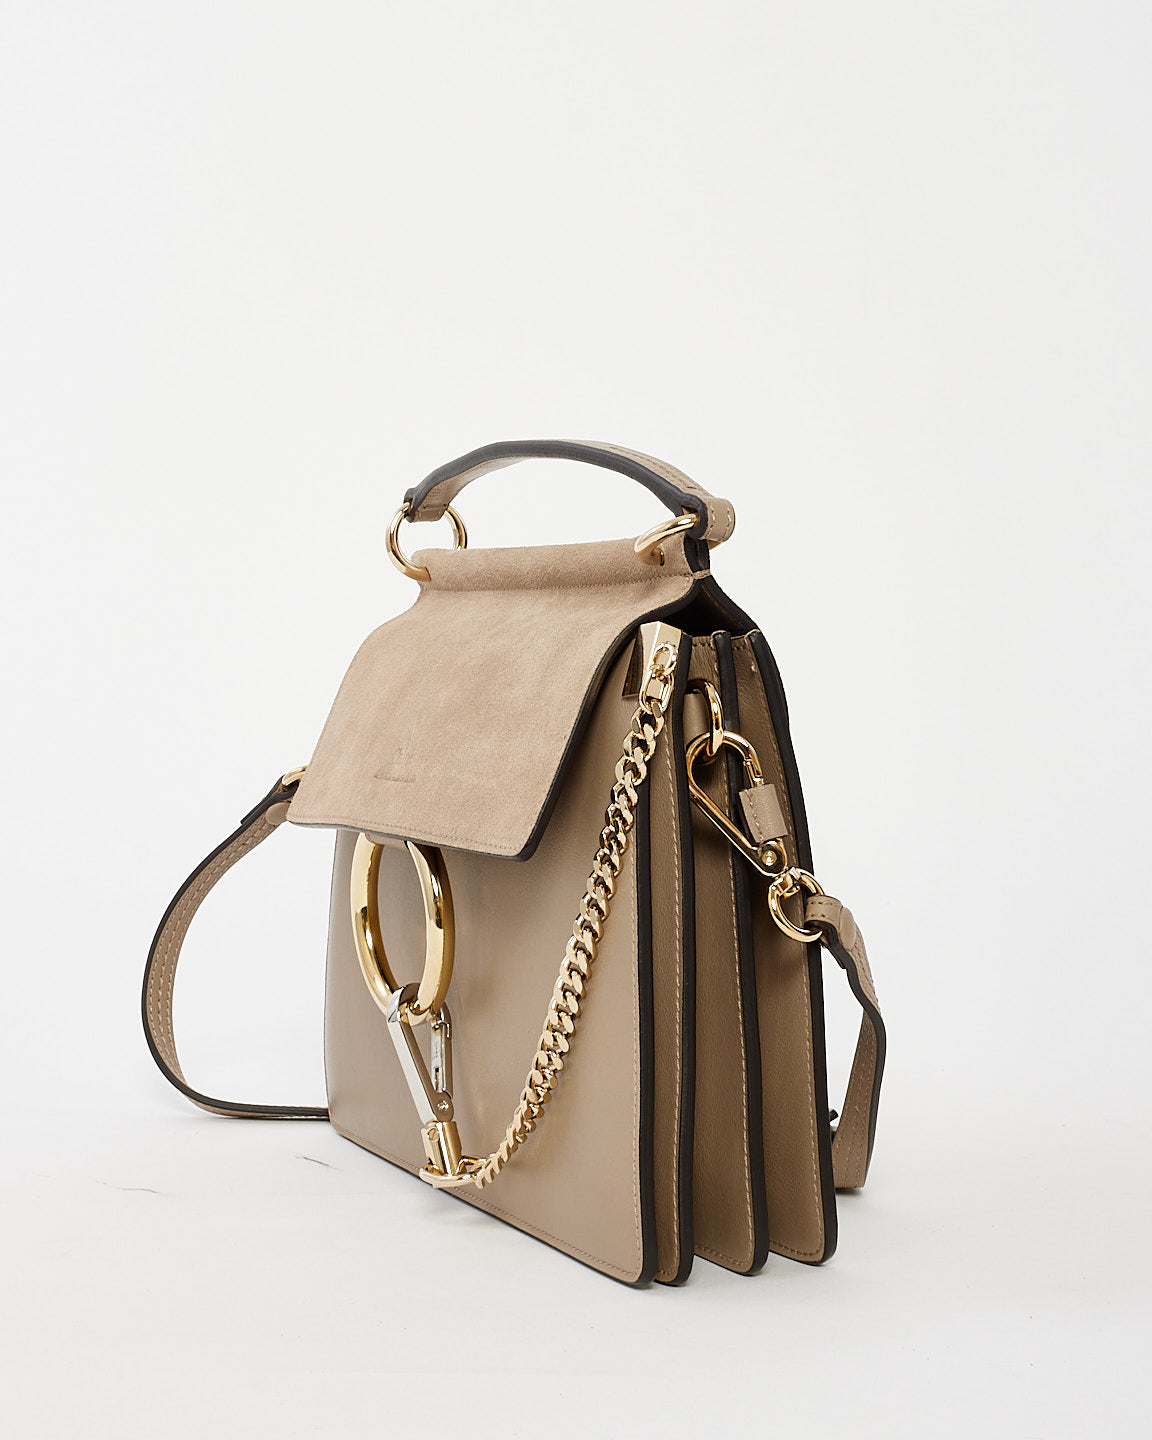 Chloé Taupe Leather and Suede Small Faye Shoulder Bag